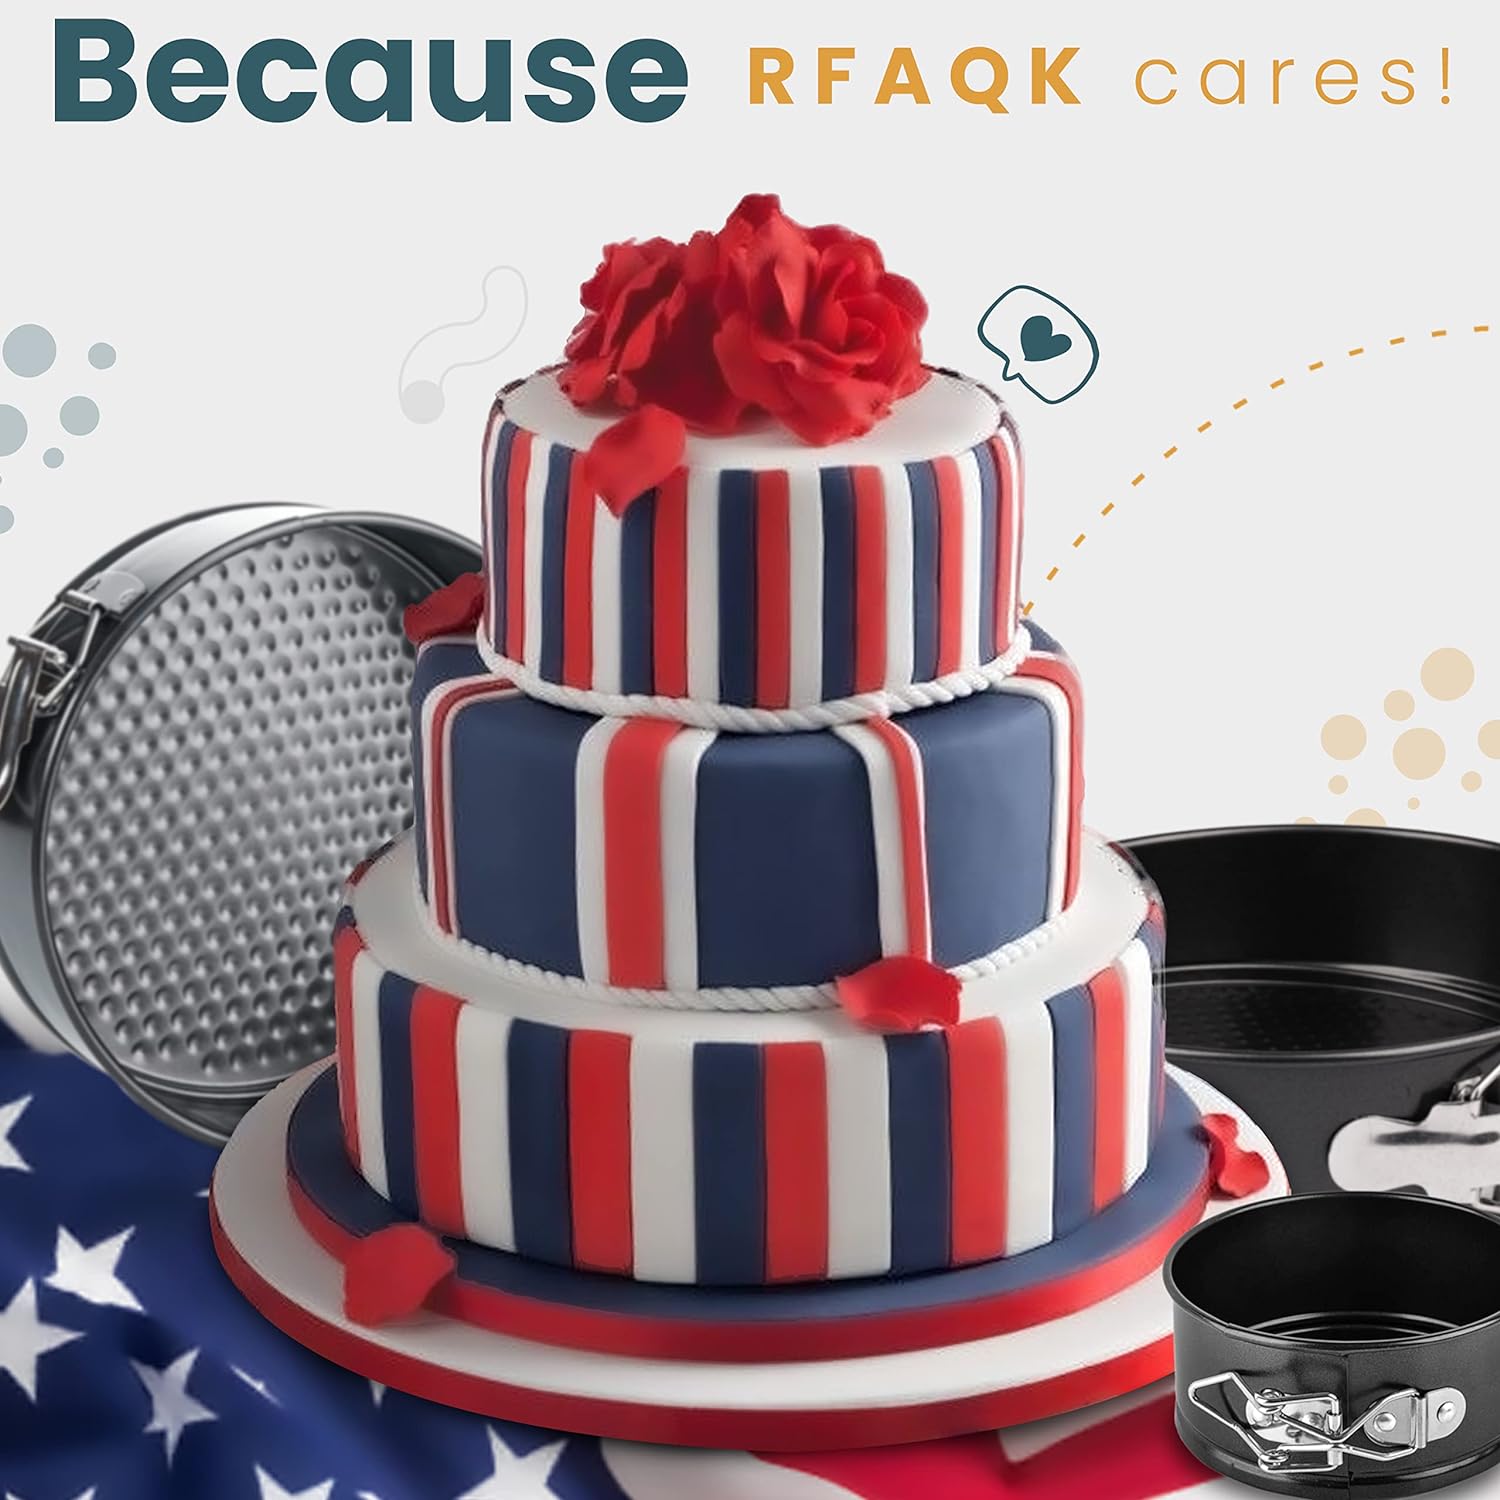 RFAQK 6,8,10 Inch Springform Cake Pan -Round Nonstick Baking Set with Removable Bottom, Leakproof Cheesecake Pan with 90 Parchment Papers